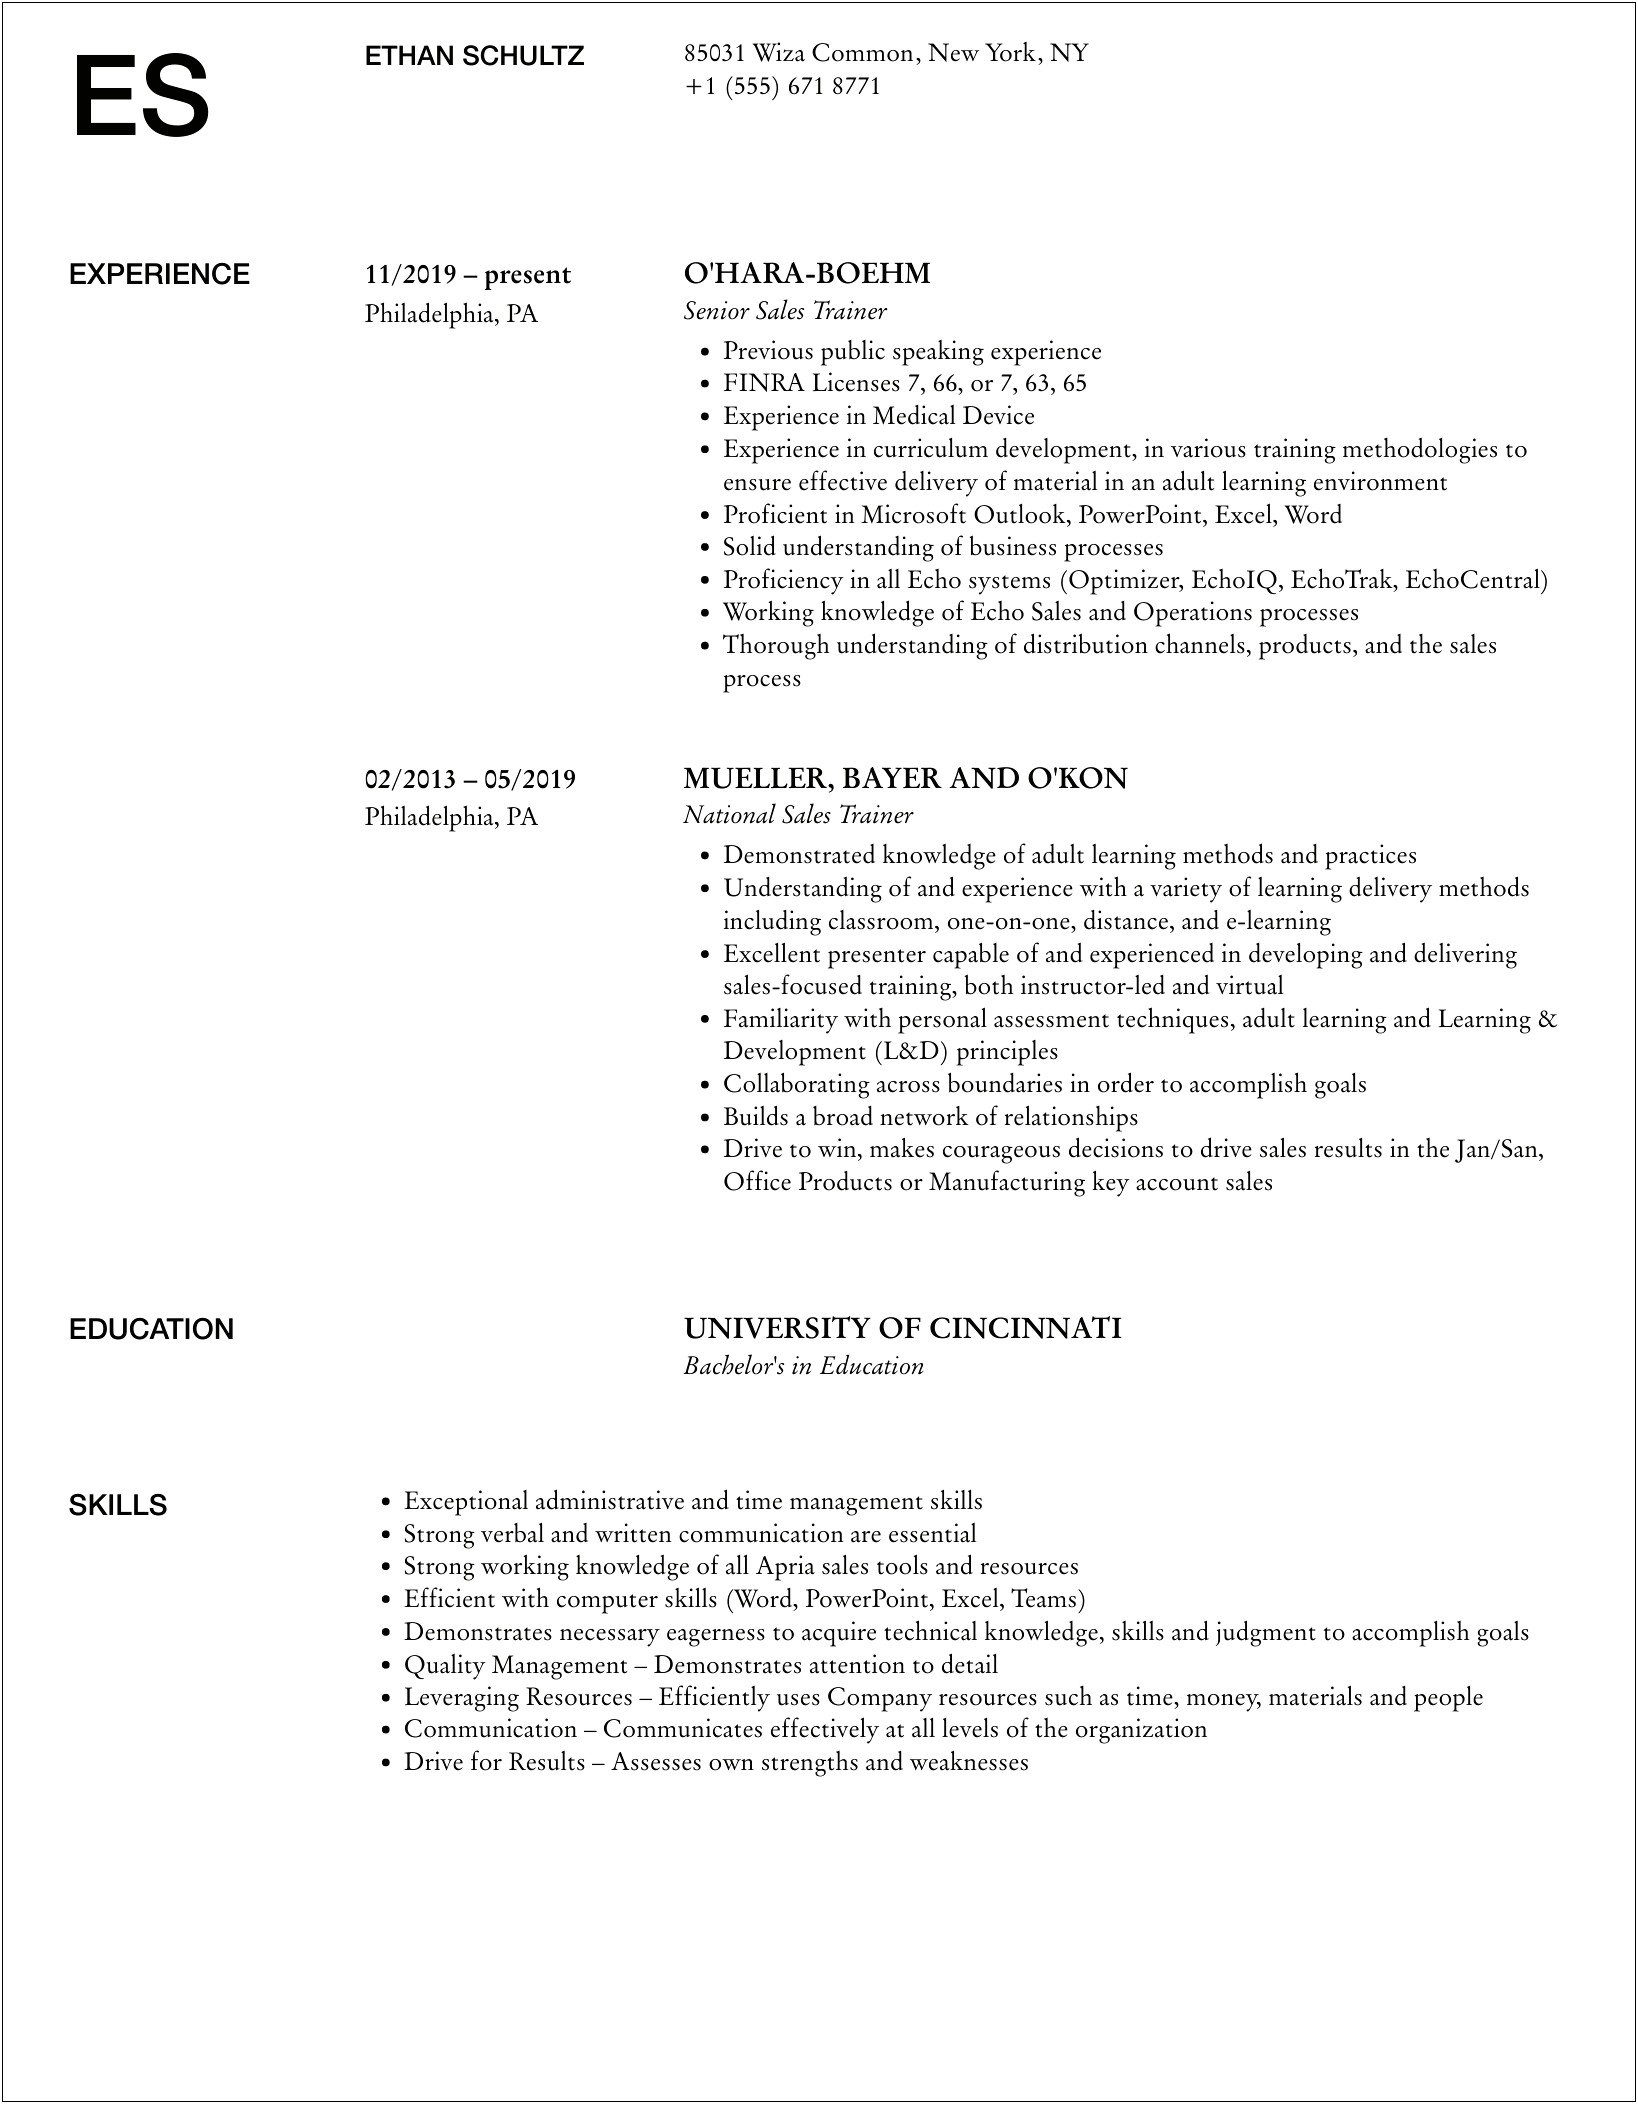 Resume Objectives For A Sales Trainer